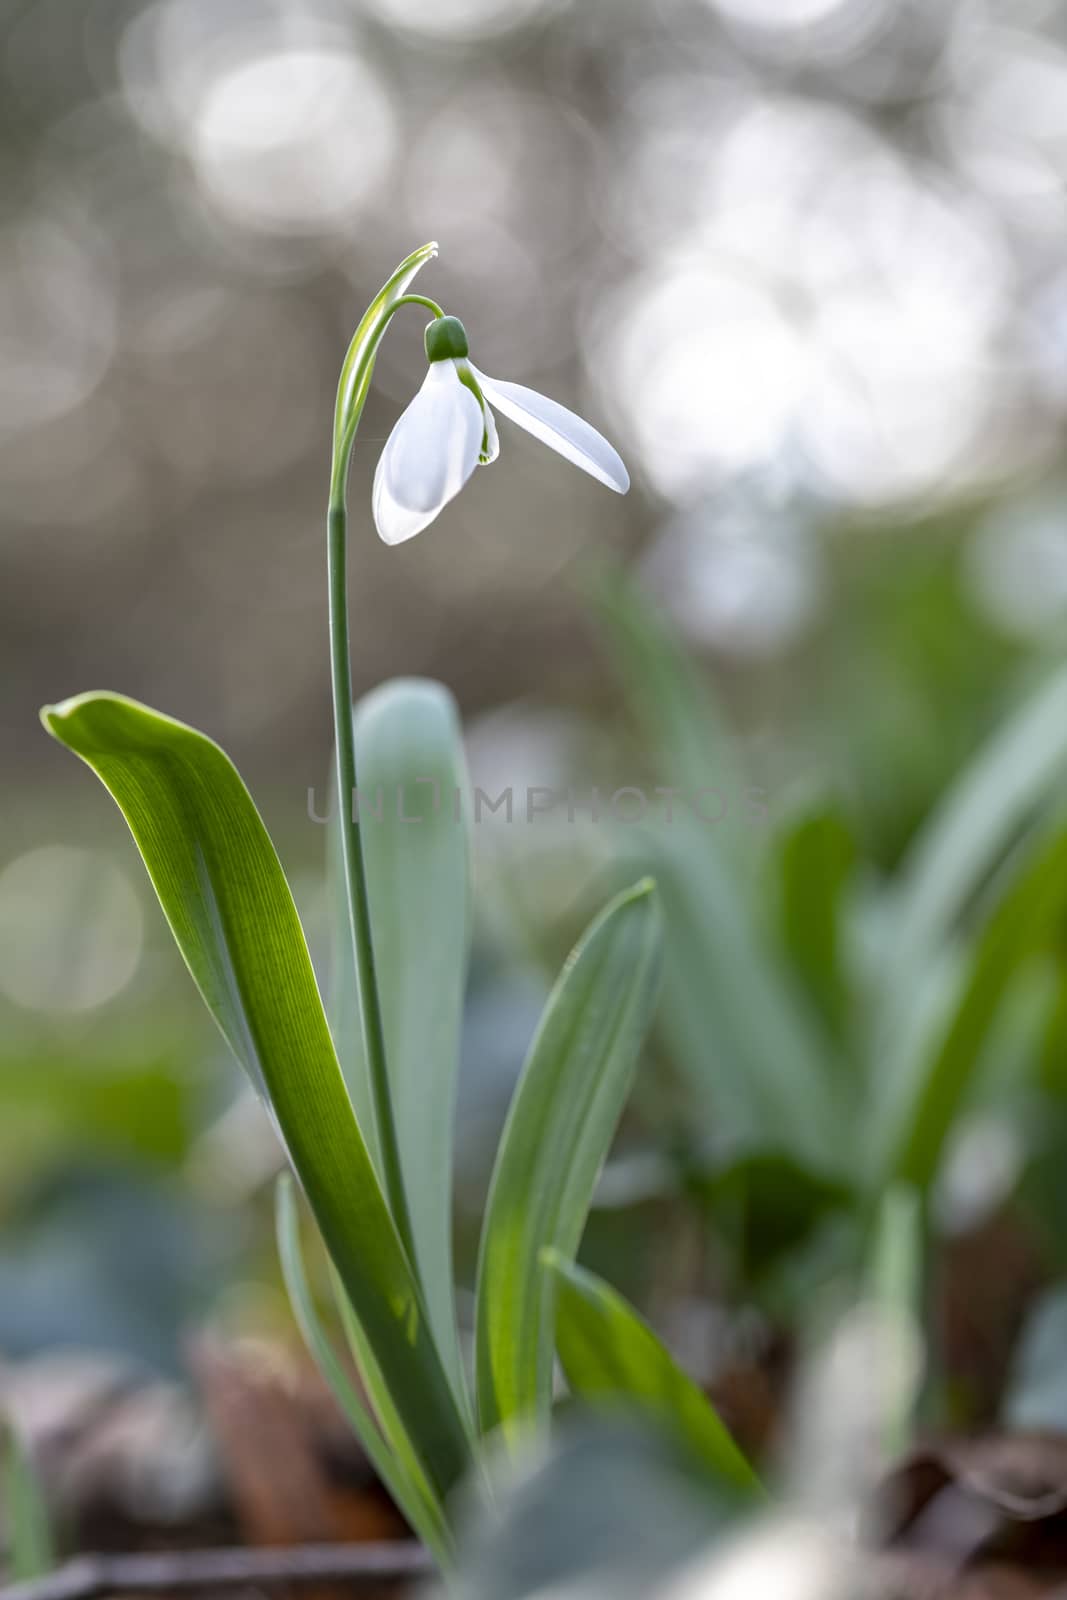 While snowdrop flower blooming in the edge and bright areas of the bushes by ankorlight